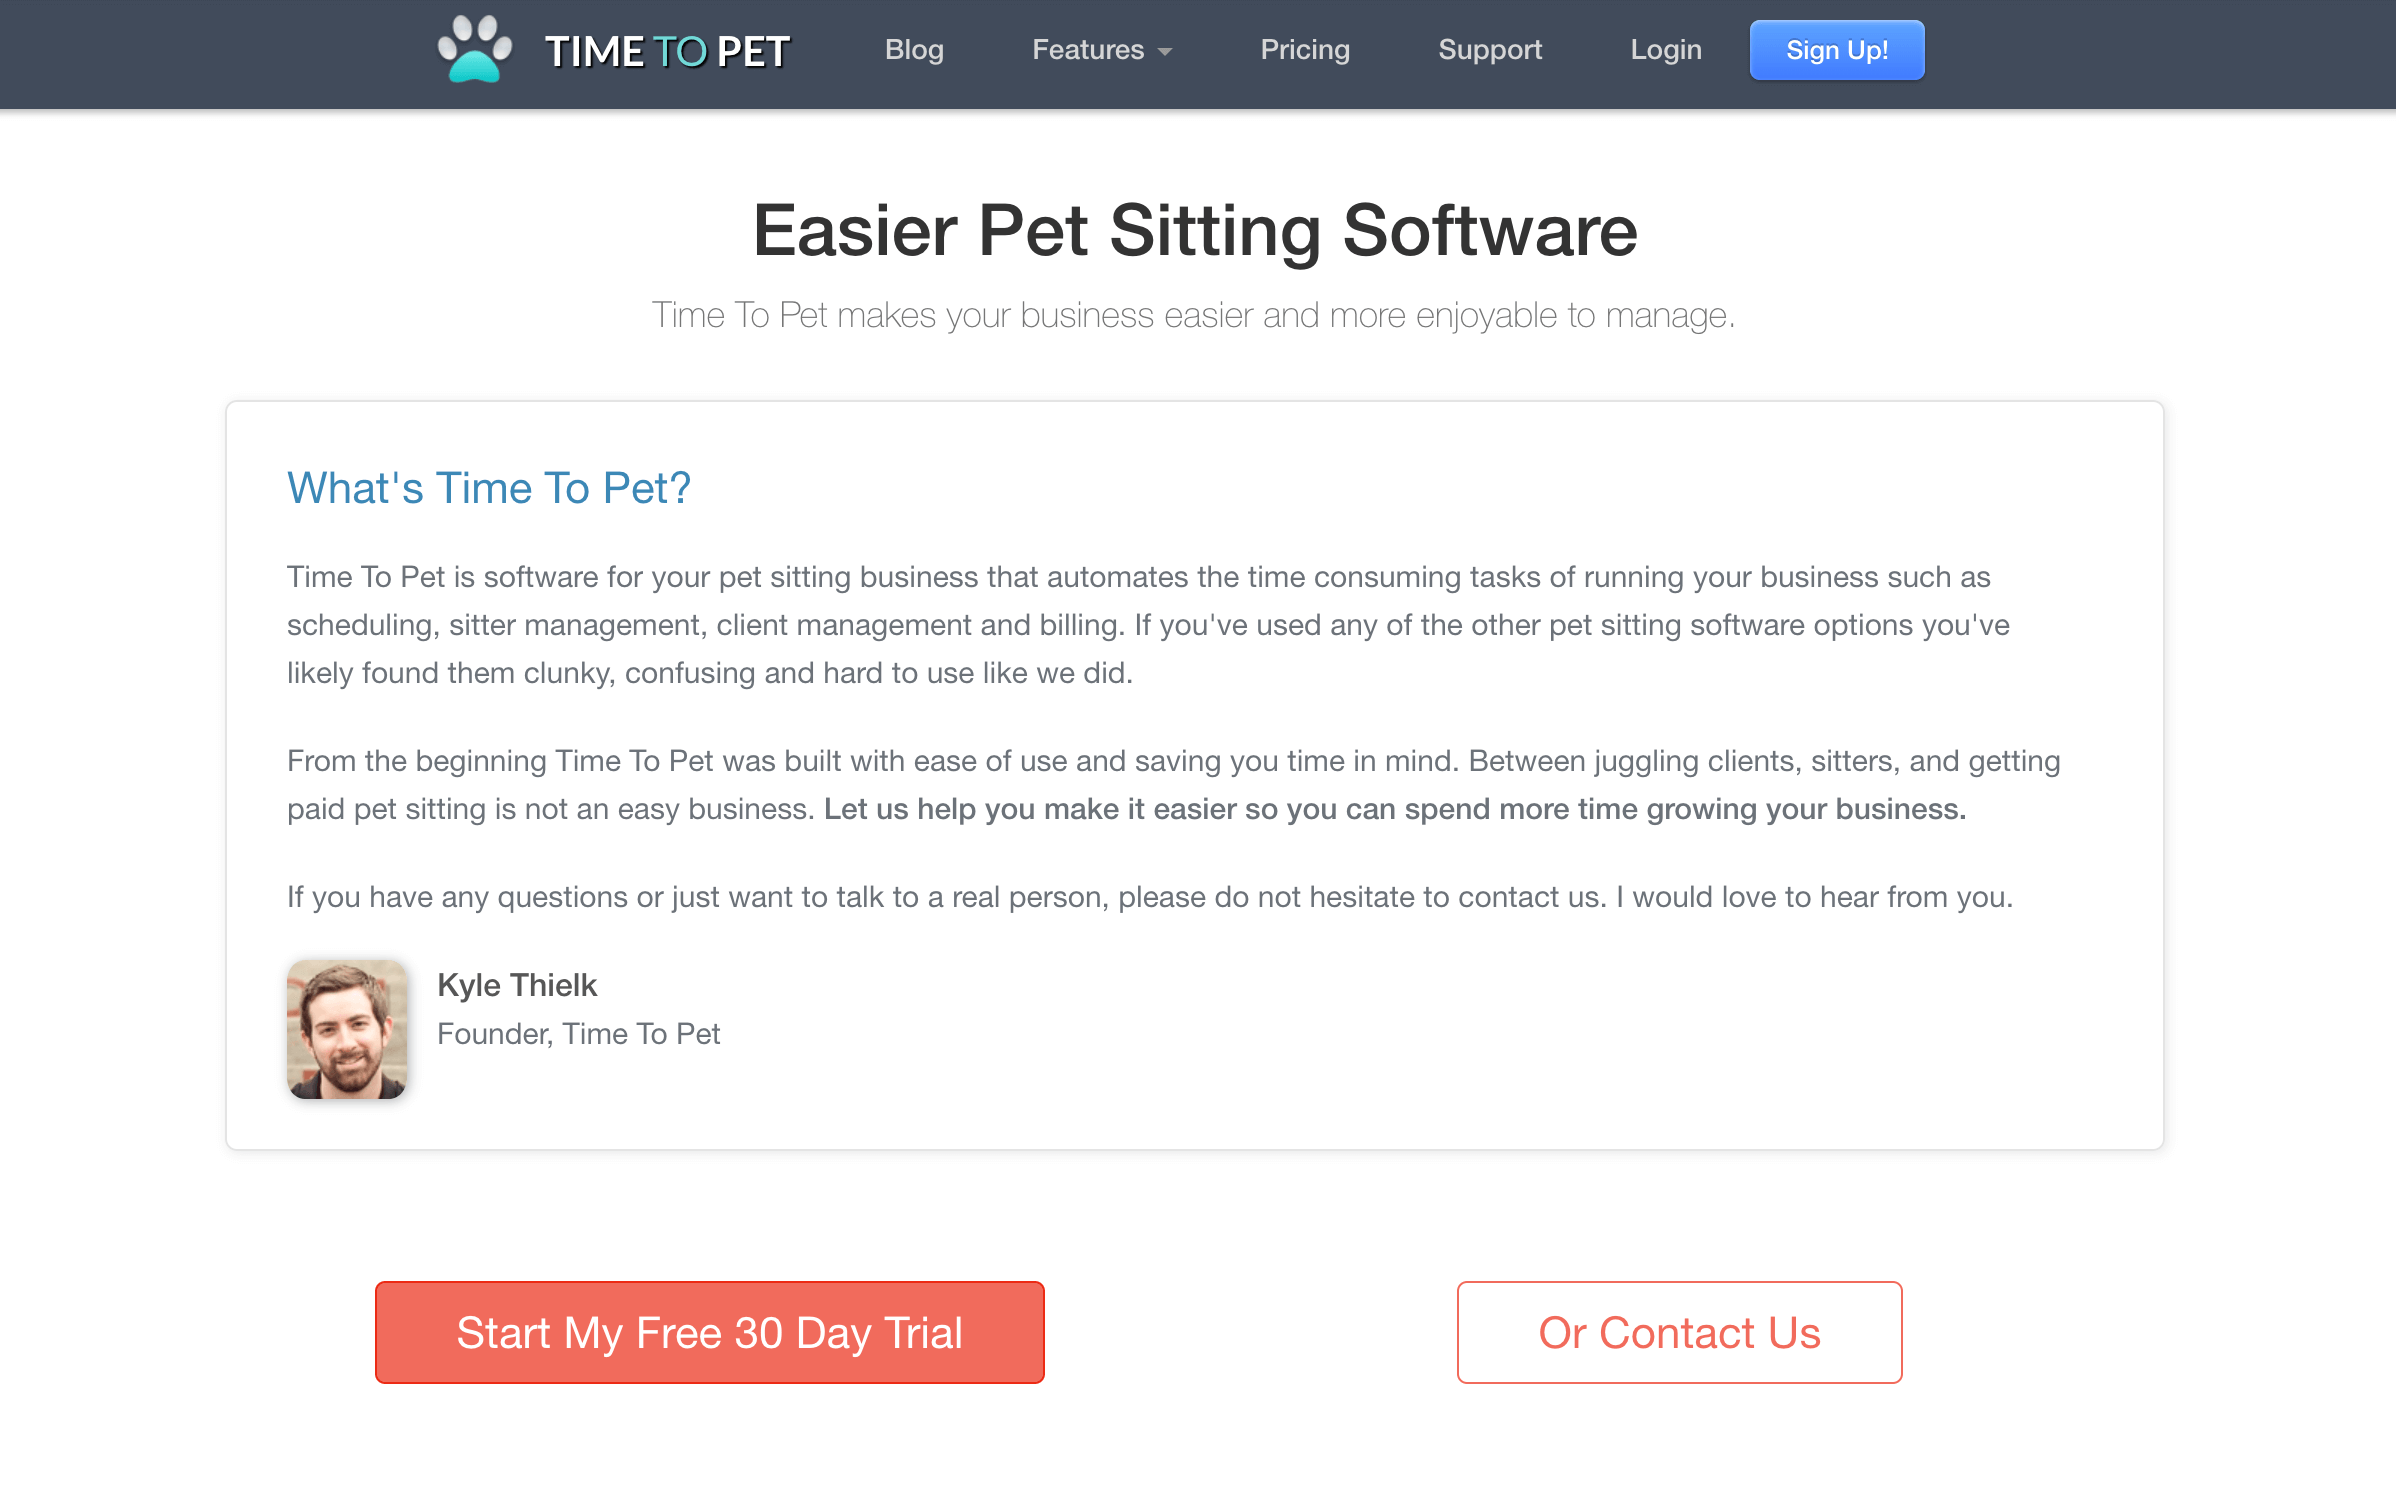 homepage of time to pet in 2015